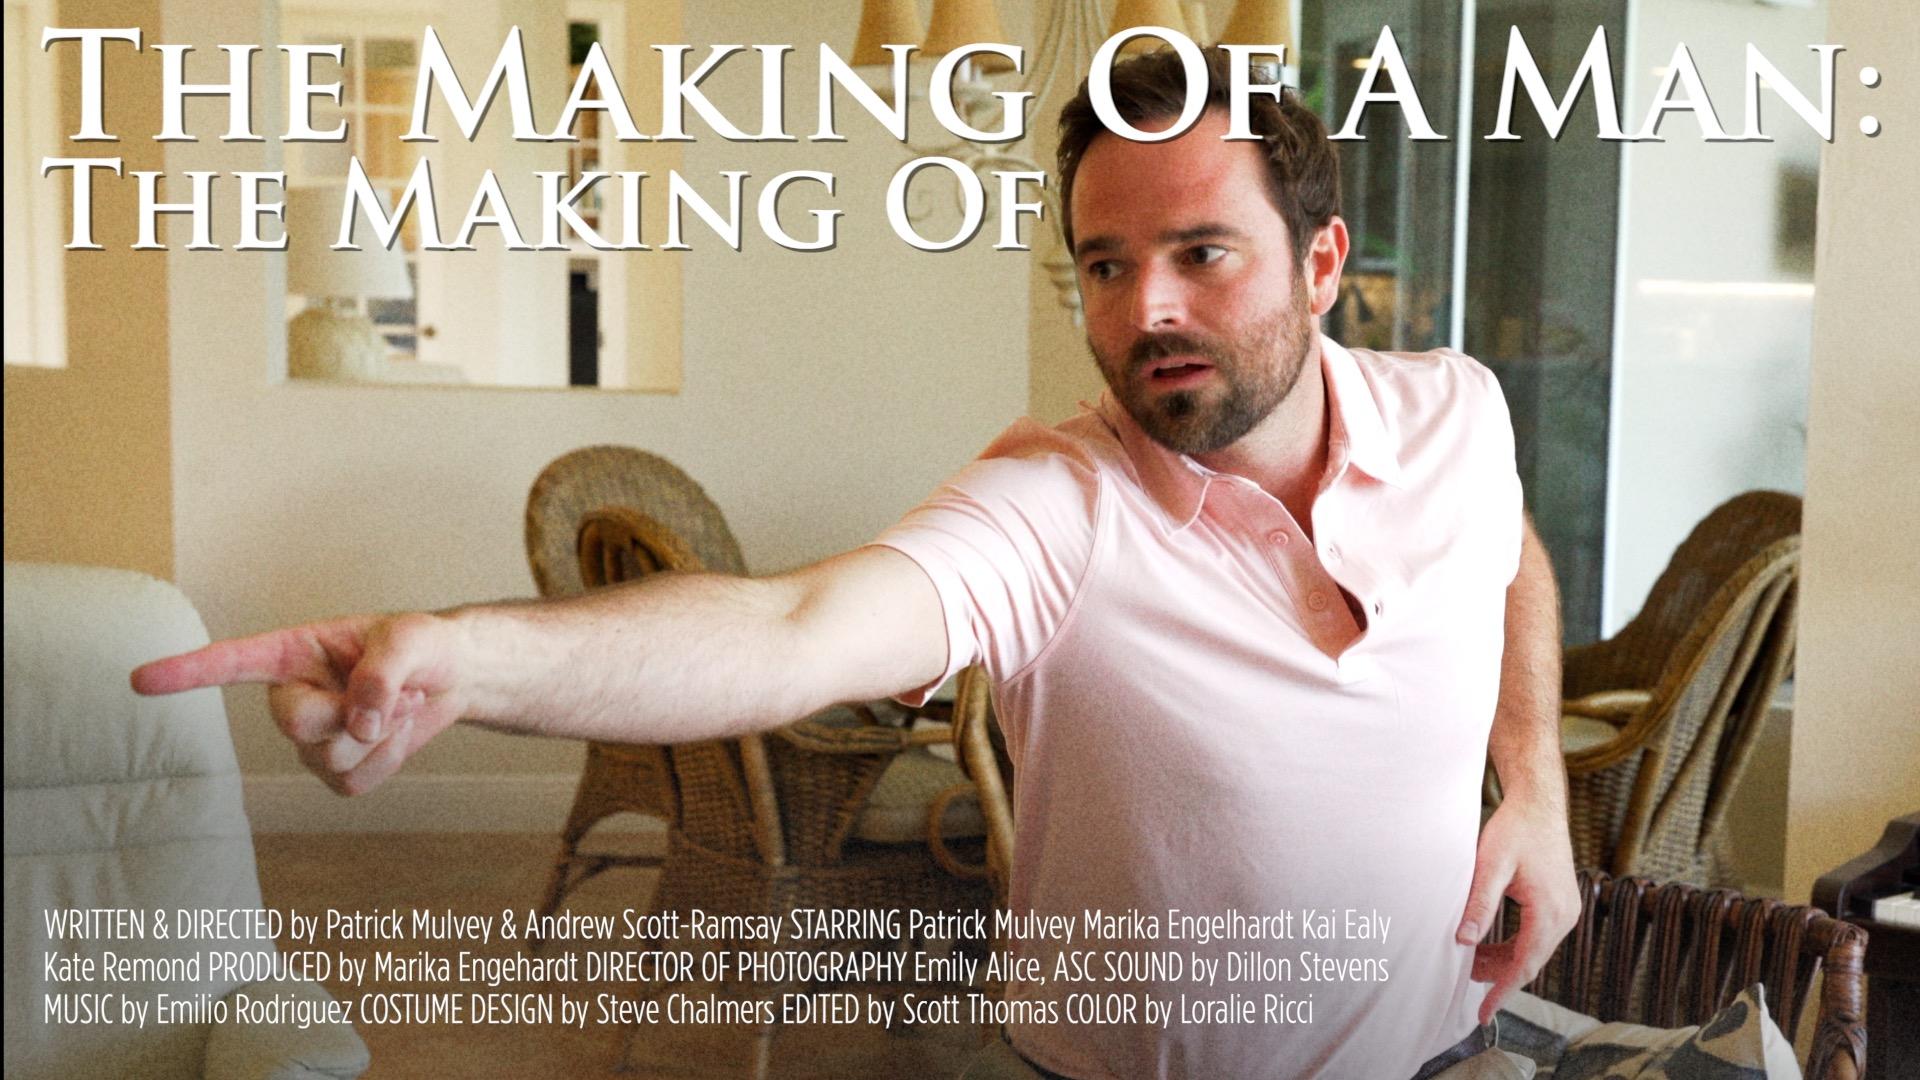 The Making of a Man: The Making of